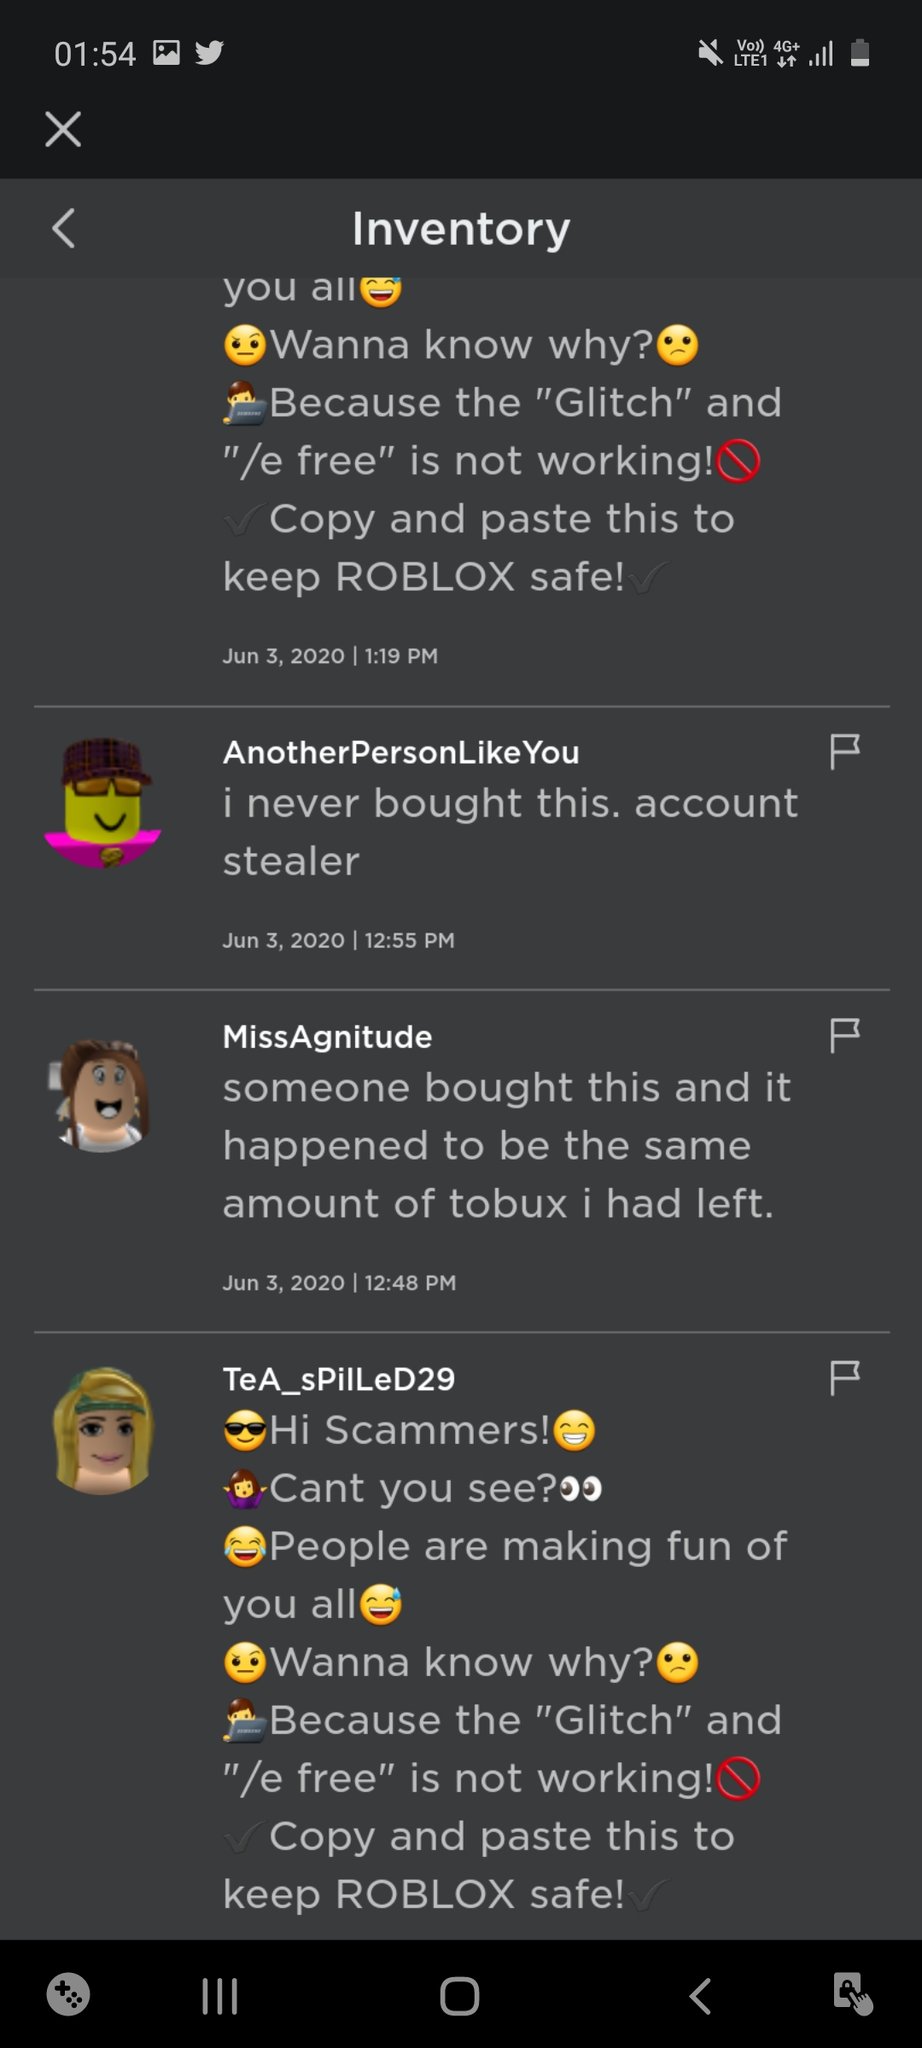 Courtneyvampette On Twitter This Is Very Important To All Roblox Members Roblox Robloxscams Robloxhackers Robux Robloxhacking Albertsstuff Flamingo Robloxgiveaway Roblox Https T Co Dwgtcbyprz Twitter - roblox account password stealer